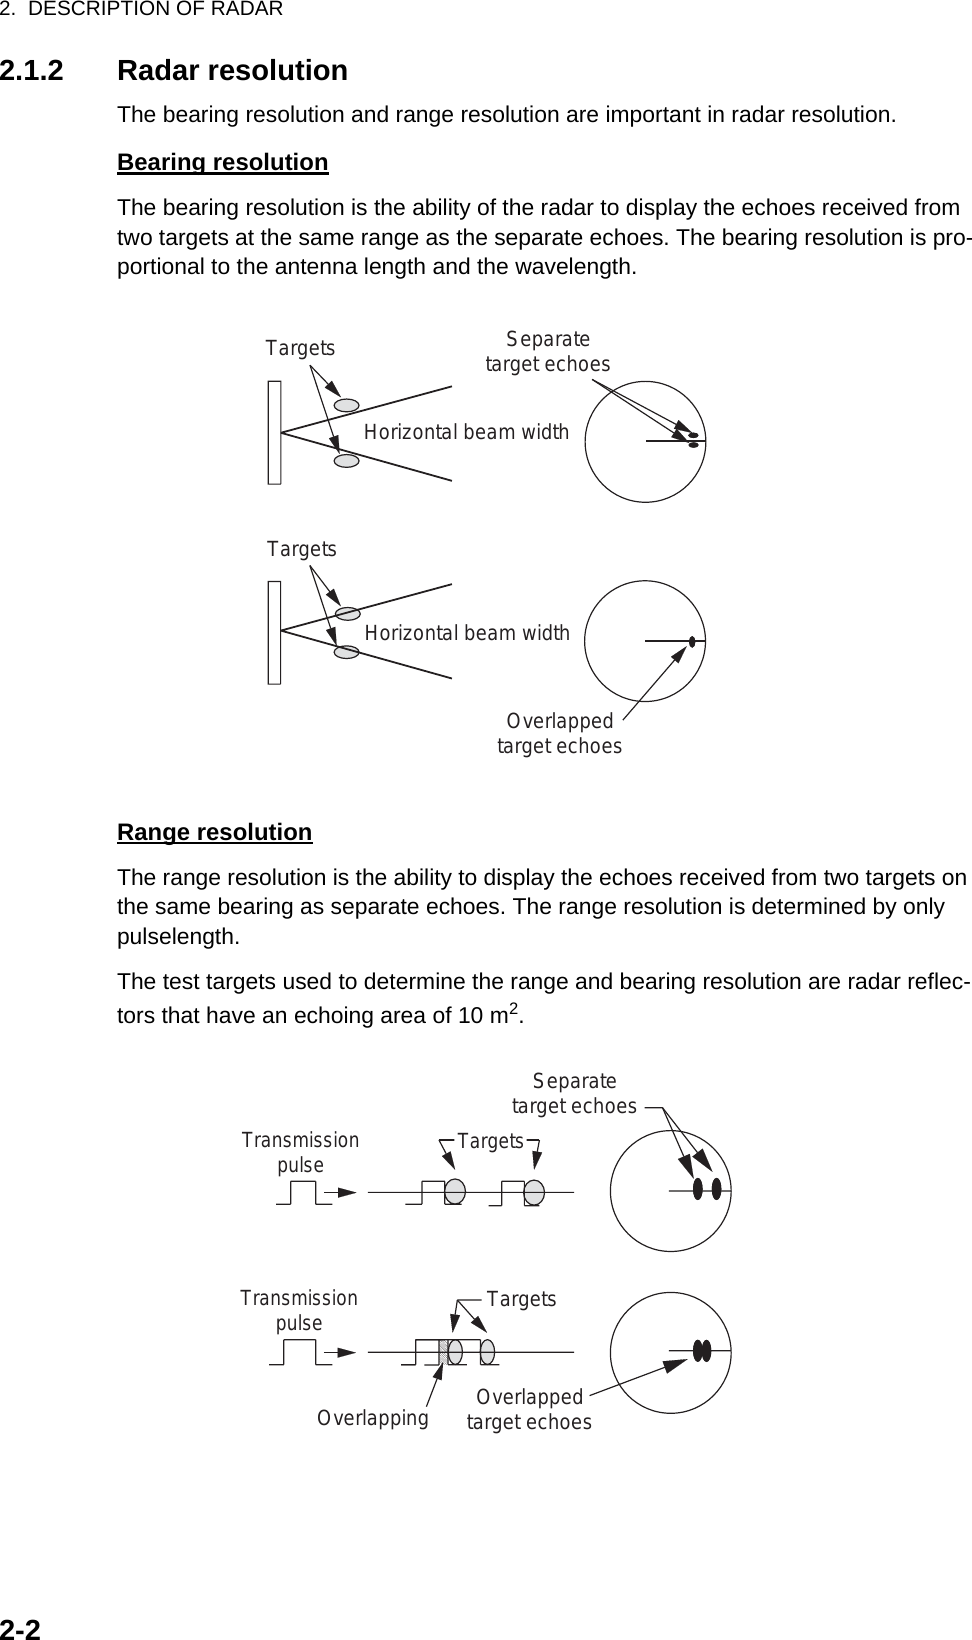 2.  DESCRIPTION OF RADAR2-22.1.2 Radar resolutionThe bearing resolution and range resolution are important in radar resolution.Bearing resolutionThe bearing resolution is the ability of the radar to display the echoes received from two targets at the same range as the separate echoes. The bearing resolution is pro-portional to the antenna length and the wavelength.Range resolutionThe range resolution is the ability to display the echoes received from two targets on the same bearing as separate echoes. The range resolution is determined by only pulselength.The test targets used to determine the range and bearing resolution are radar reflec-tors that have an echoing area of 10 m2.TargetsTargetsHorizontal beam widthHorizontal beam widthSeparatetarget echoesOverlappedtarget echoesSeparatetarget echoesOverlappedtarget echoesTargetsTargetsOverlappingTransmissionpulseTransmissionpulse